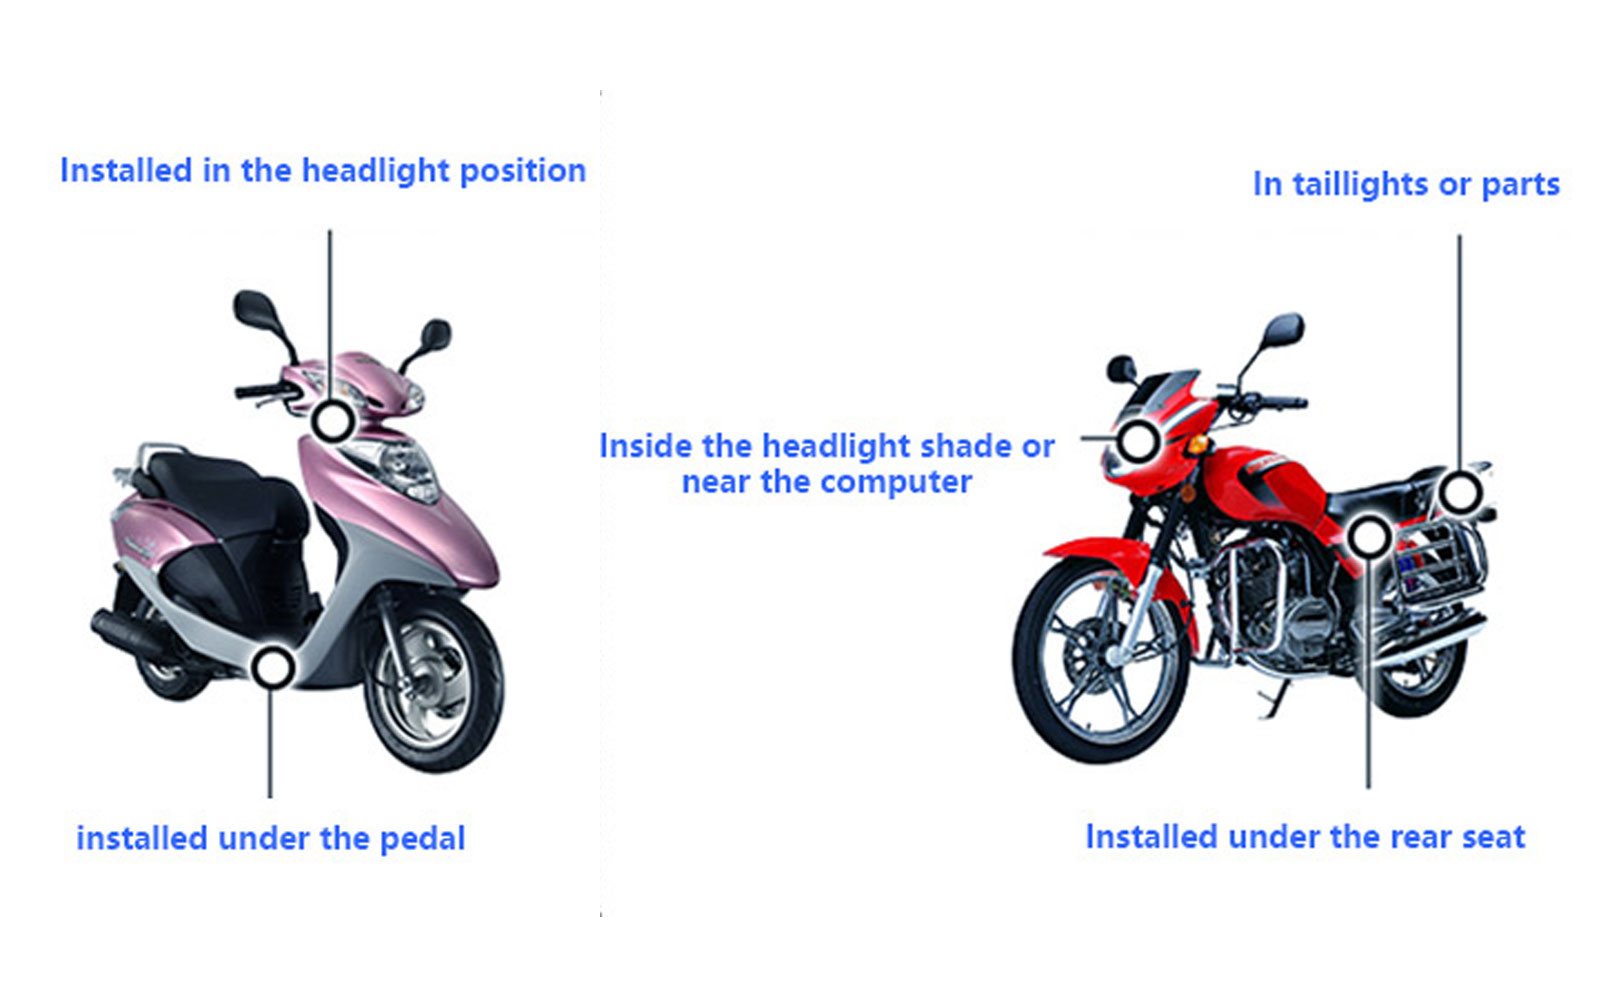 where the gps tracker device hide in motorcycle or bike?